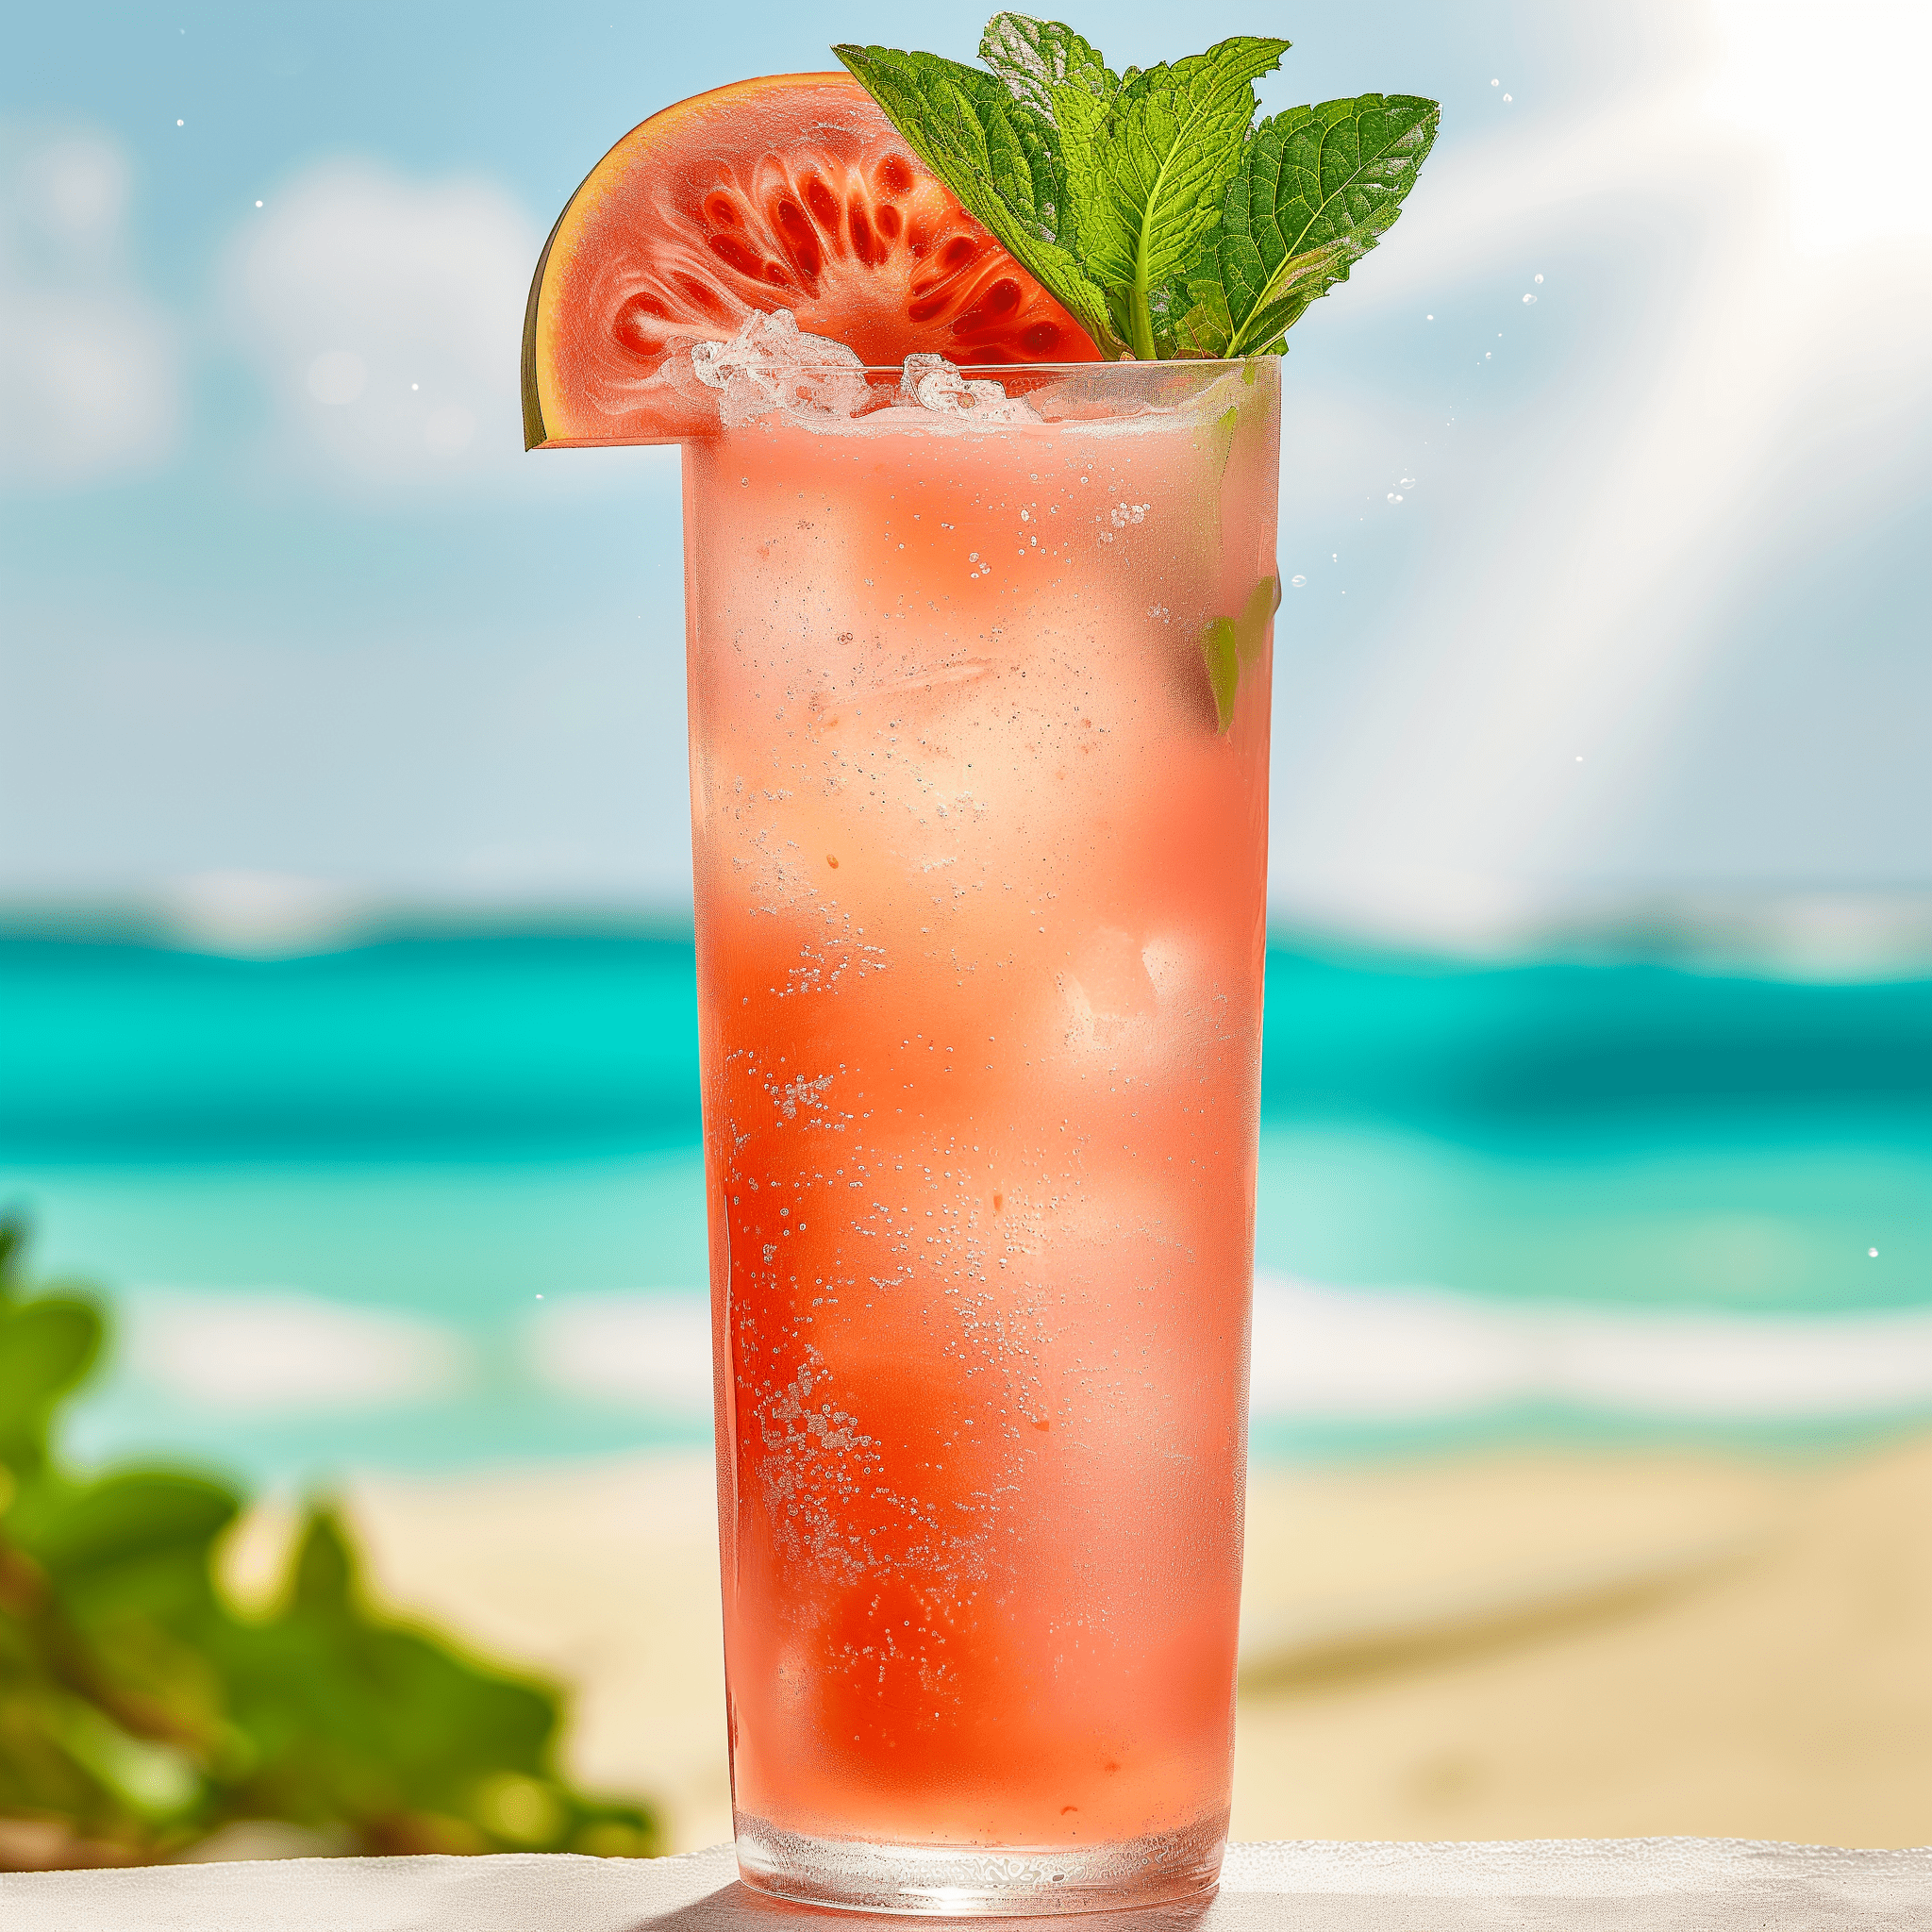 The Tropical Guava Mocktail is a delightful blend of sweet and tangy flavors, with the guava nectar providing a luscious sweetness that is perfectly balanced by the zesty lemon juice. The mint leaves add a refreshing herbal undertone that makes the drink light and invigorating.